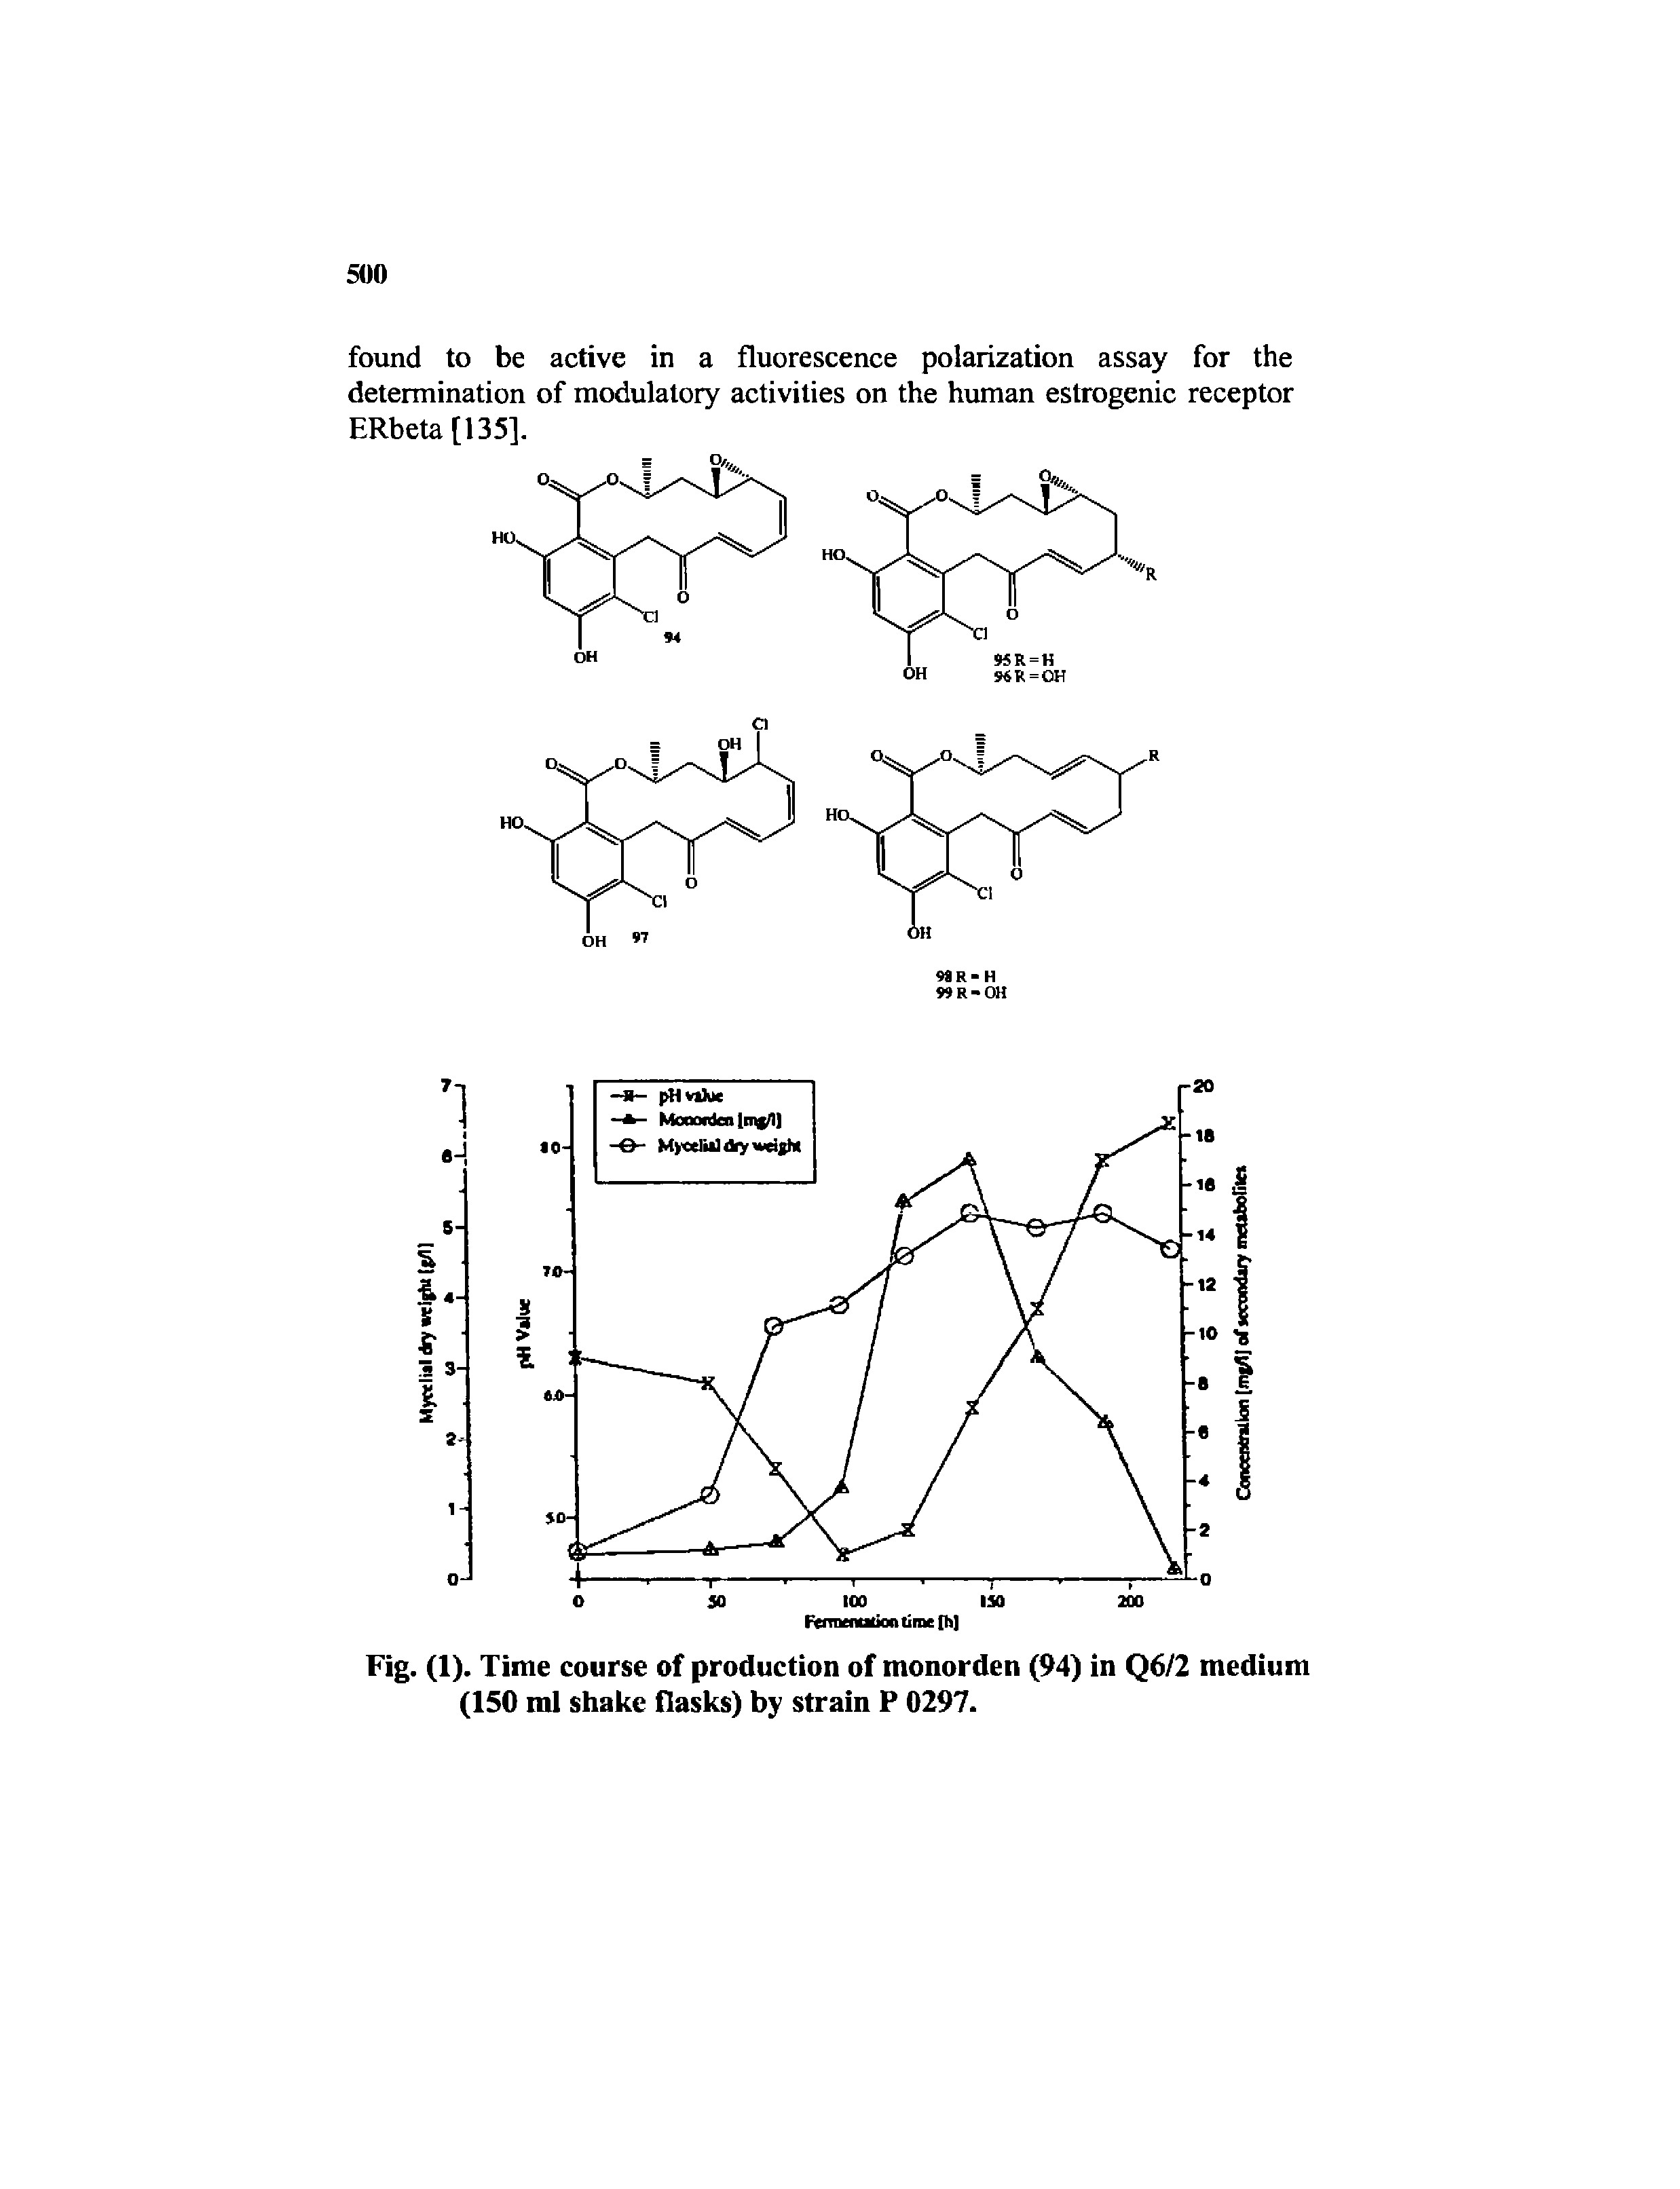 Fig. (1). Time course of production of monorden (94) in Q6/2 medium (150 ml shake flasks) by strain P 0297.